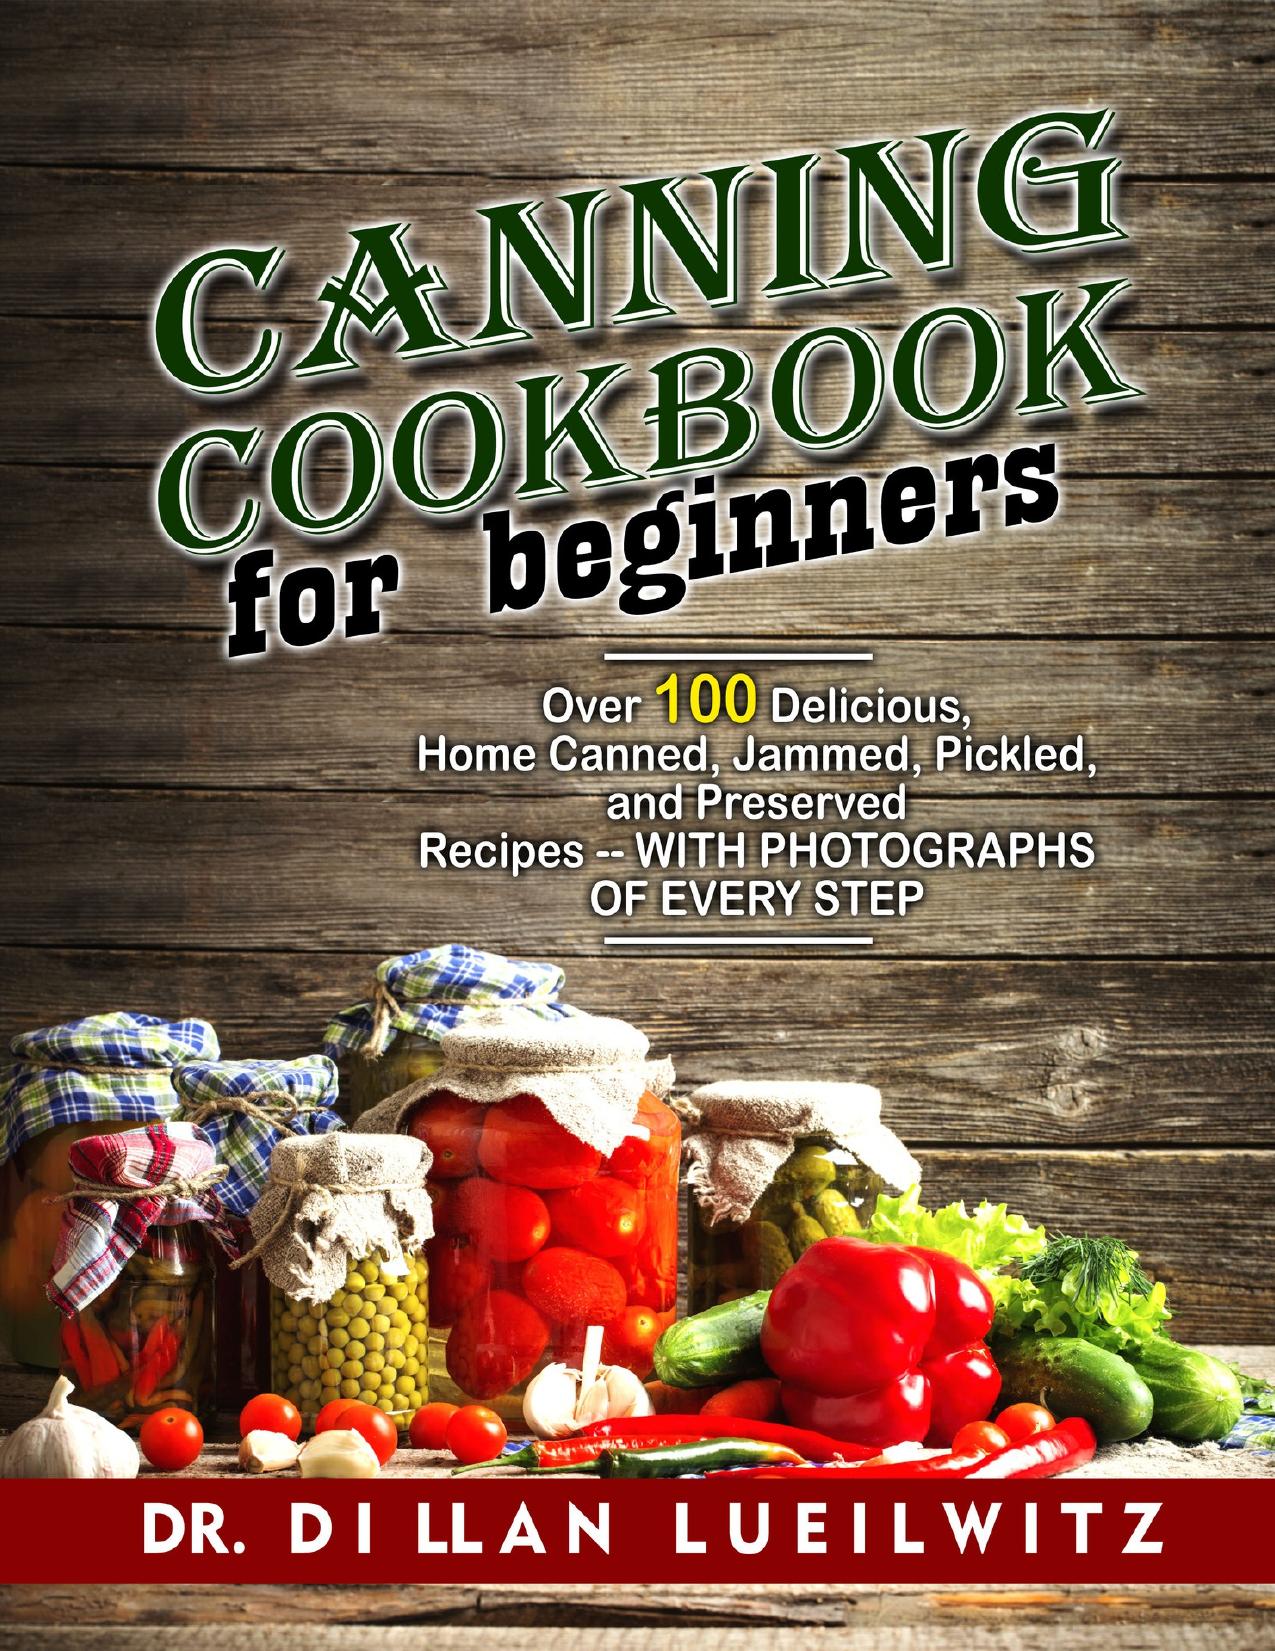 Canning Cookbook for Beginners: Over 100 delicious, home canned, jammed, pickled, and preserved recipes -- with photographs of every step by lueilwitz Dr. Dillan